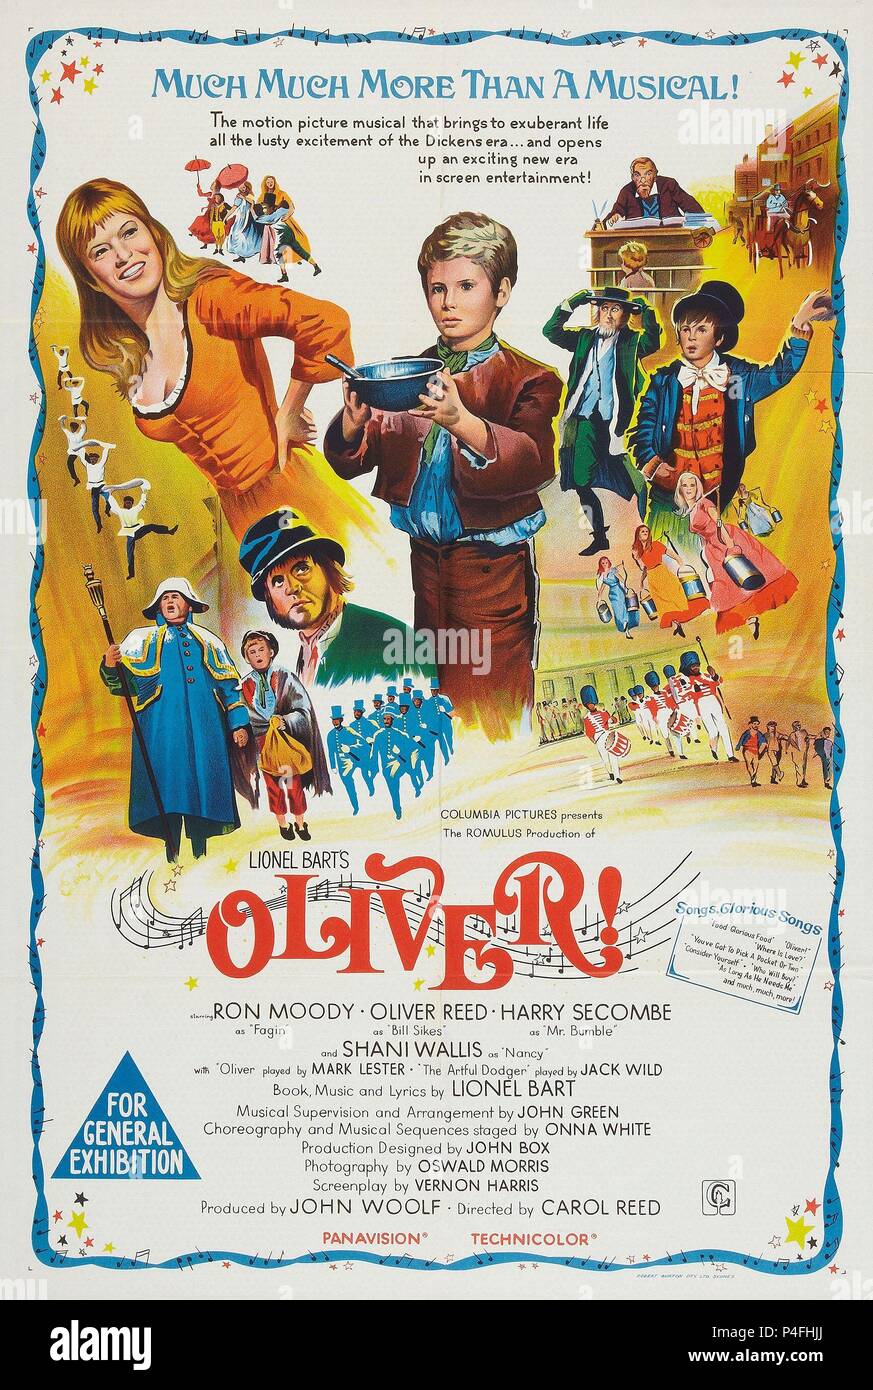 Original Film Title: OLIVER!. English Title: OLIVER!. Film Director: CAROL  REED. Year: 1968. Credit: COLUMBIA PICTURES / Album Stock Photo - Alamy